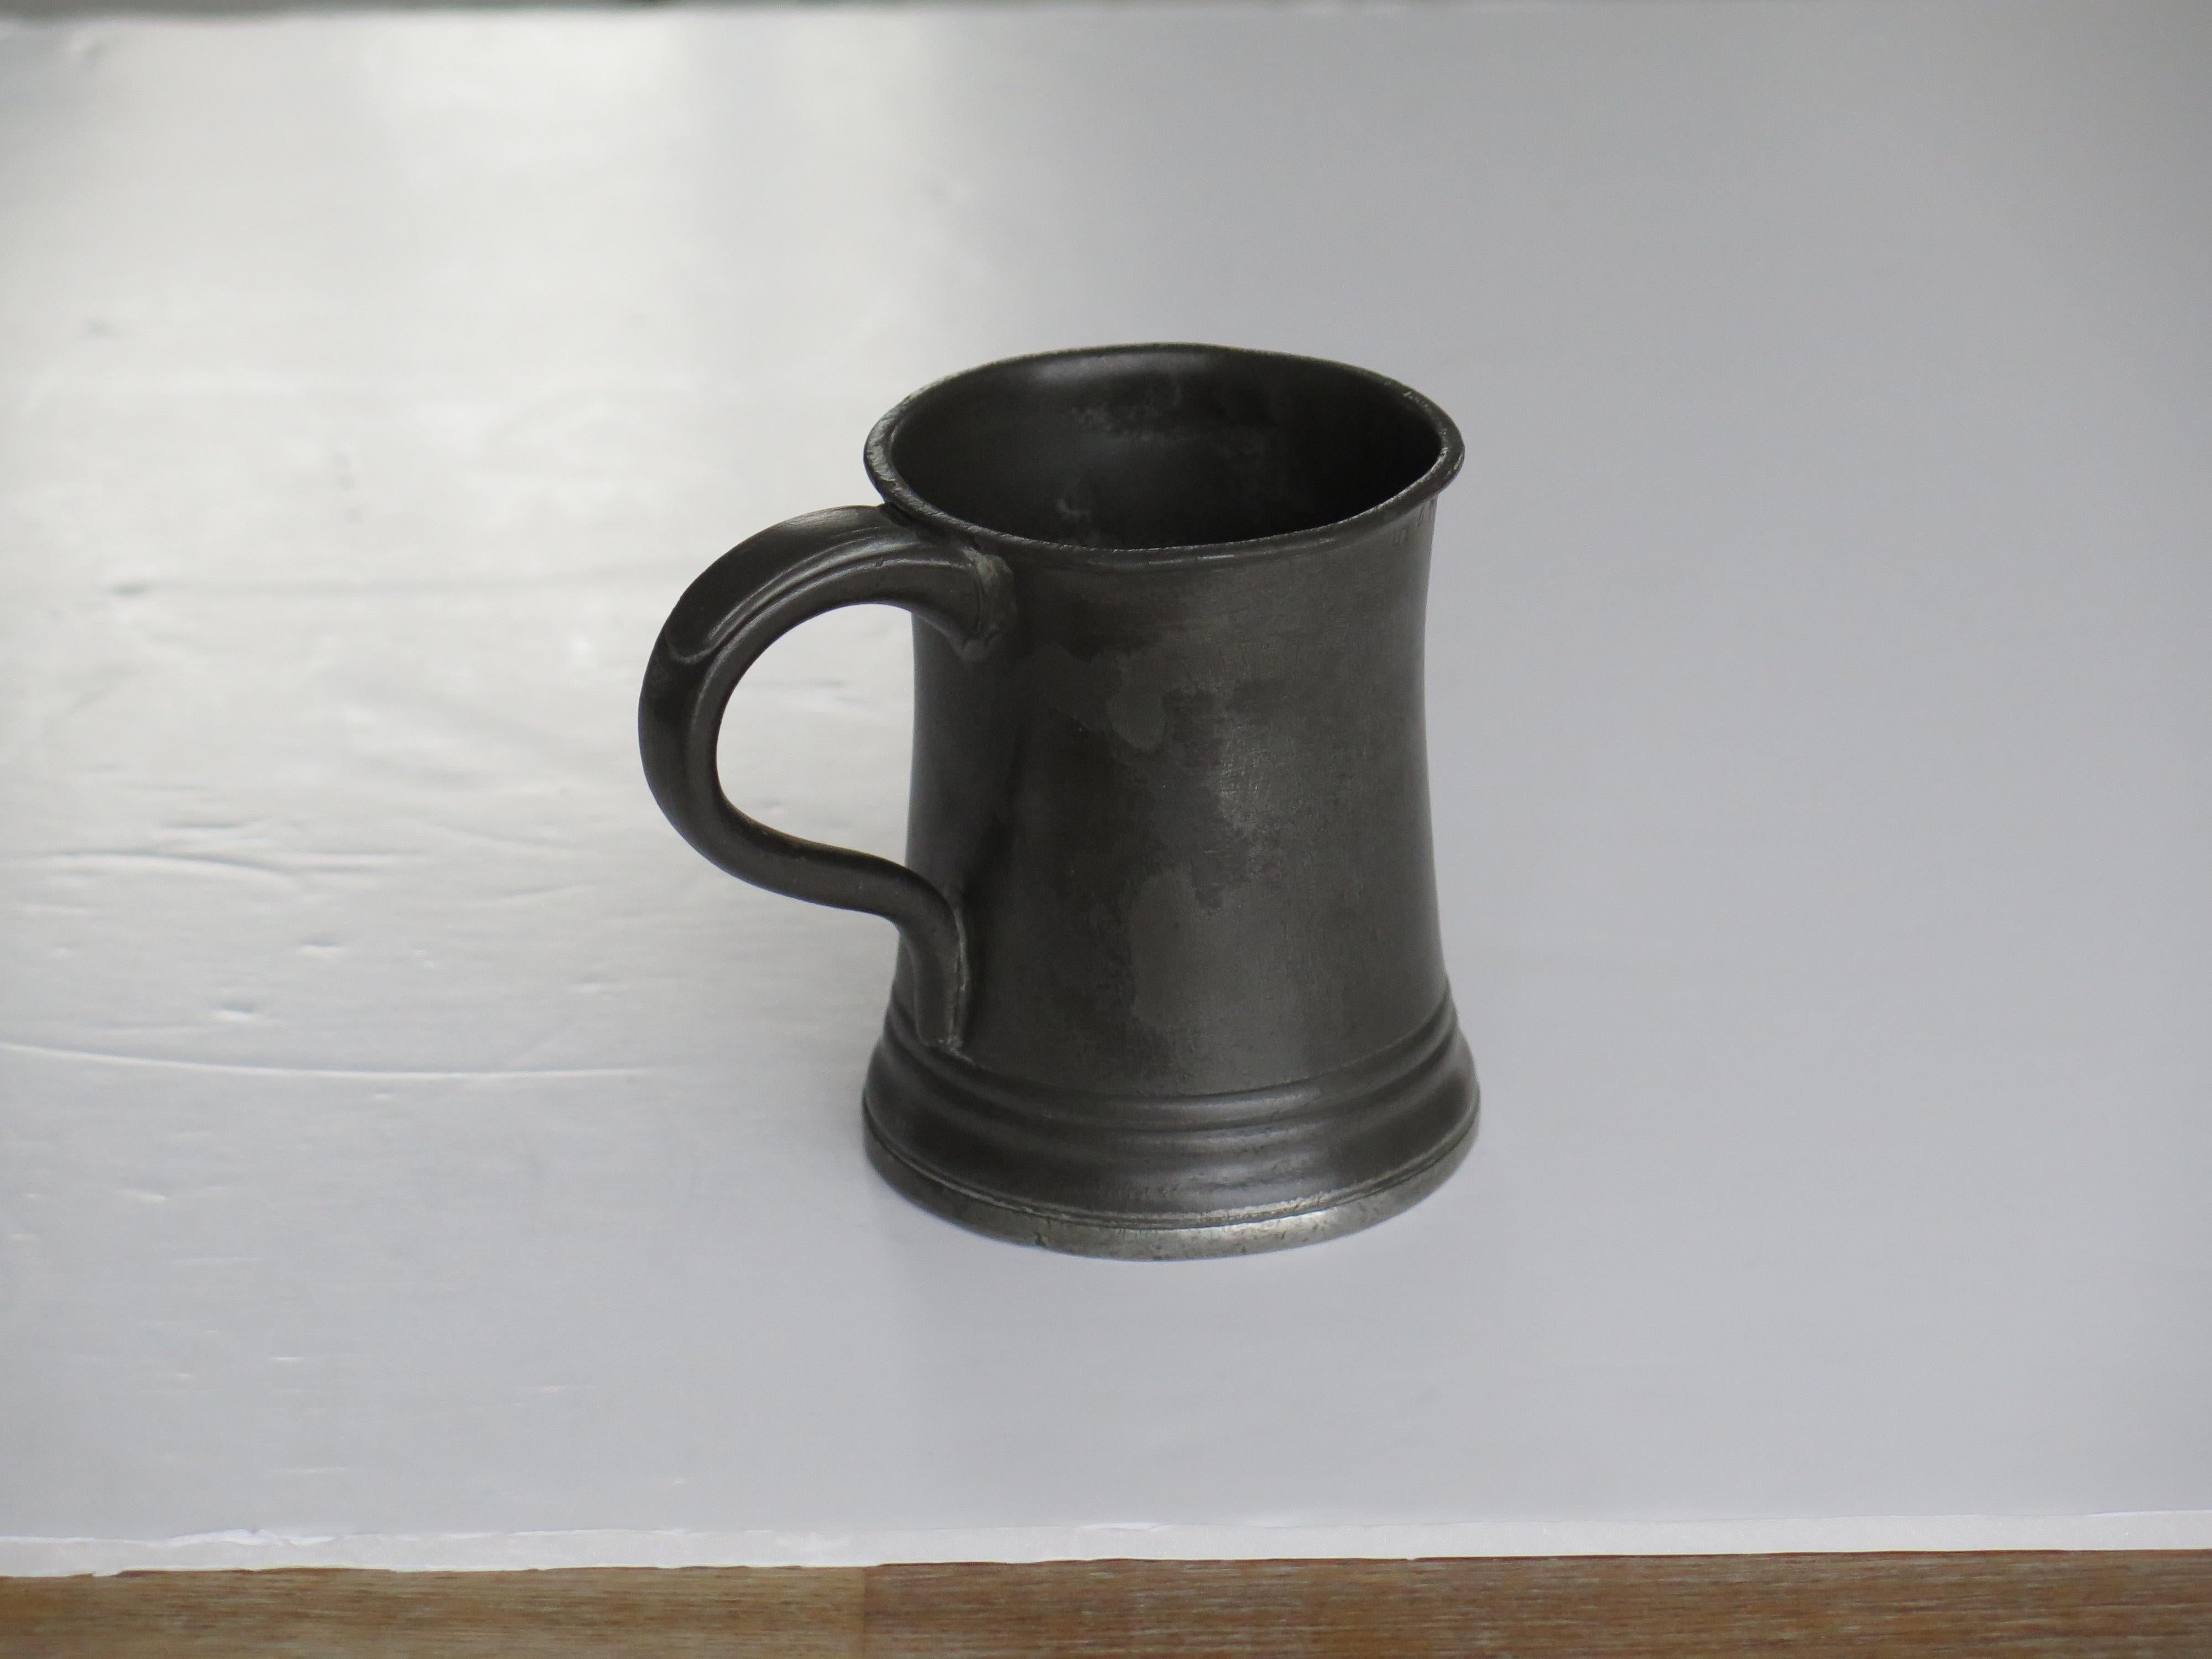 This is a good mid-19th century pewter half pint tankard or mug all fully stamped and with the makers name of James Yates

This tankard has a good shape with a flared skirt base, curved over top rim and a solid loop handle with a thumb rest to the